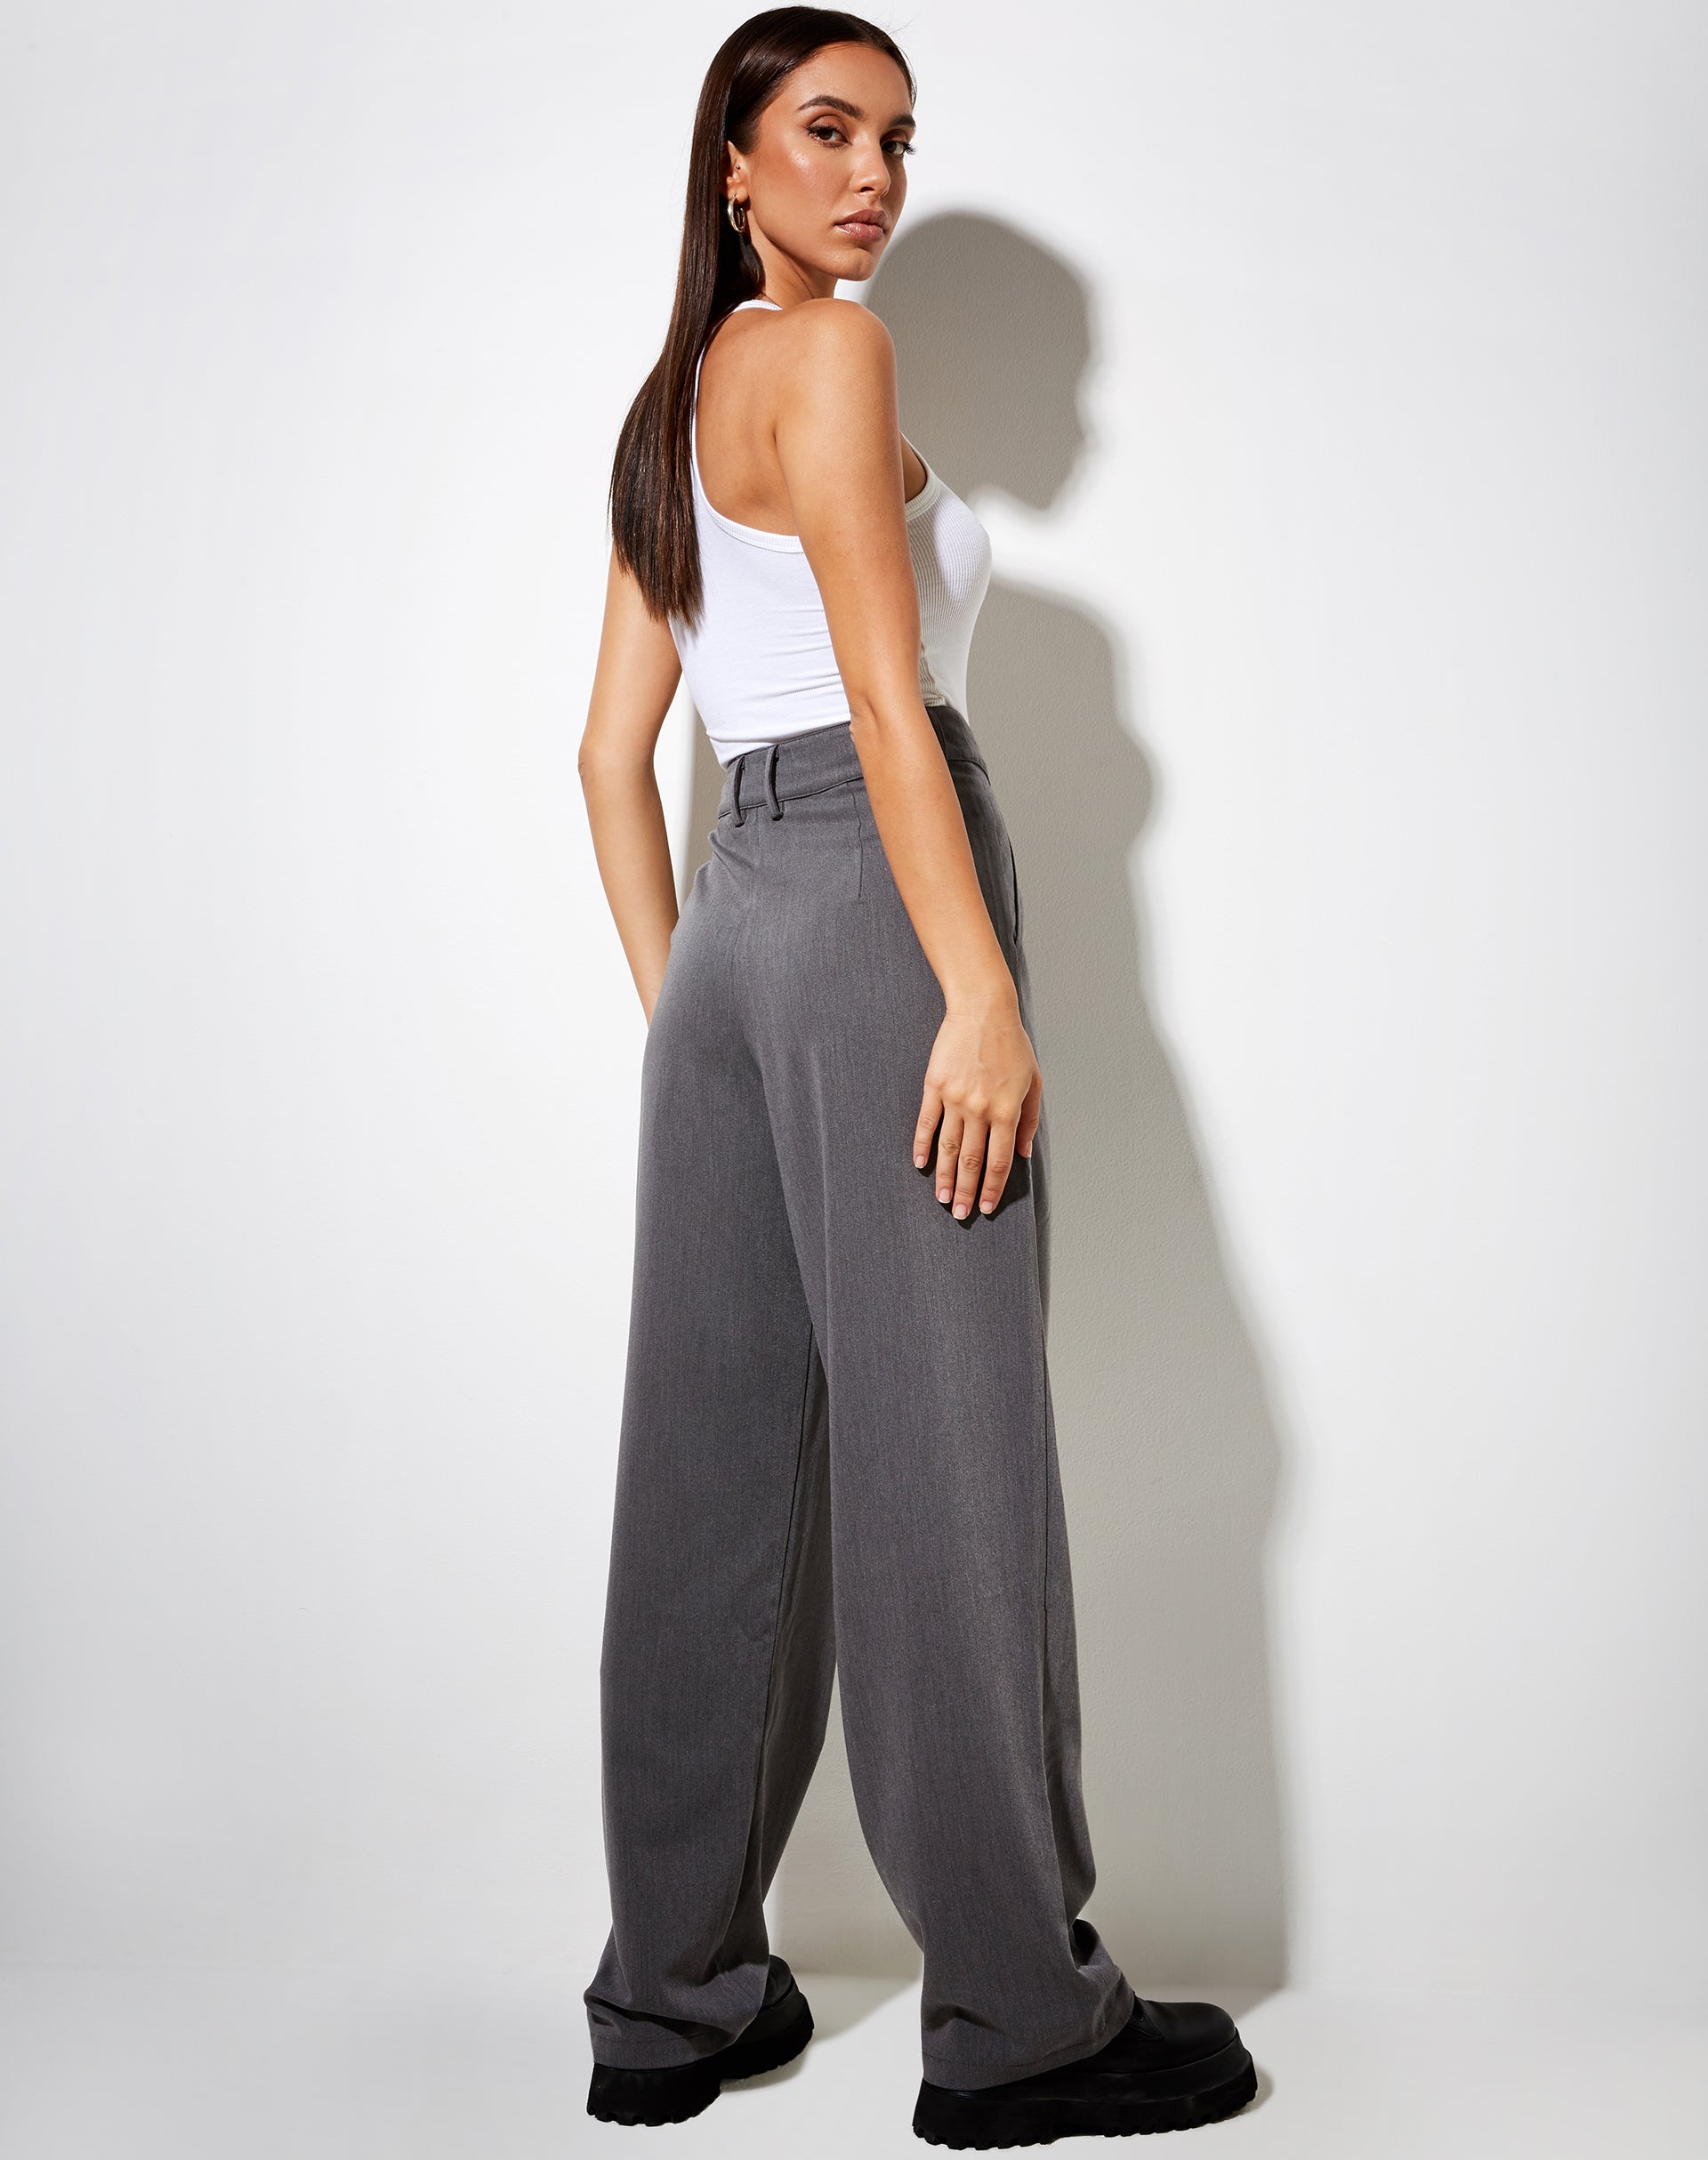 Image of Sakila Trouser in Tailoring Charcoal